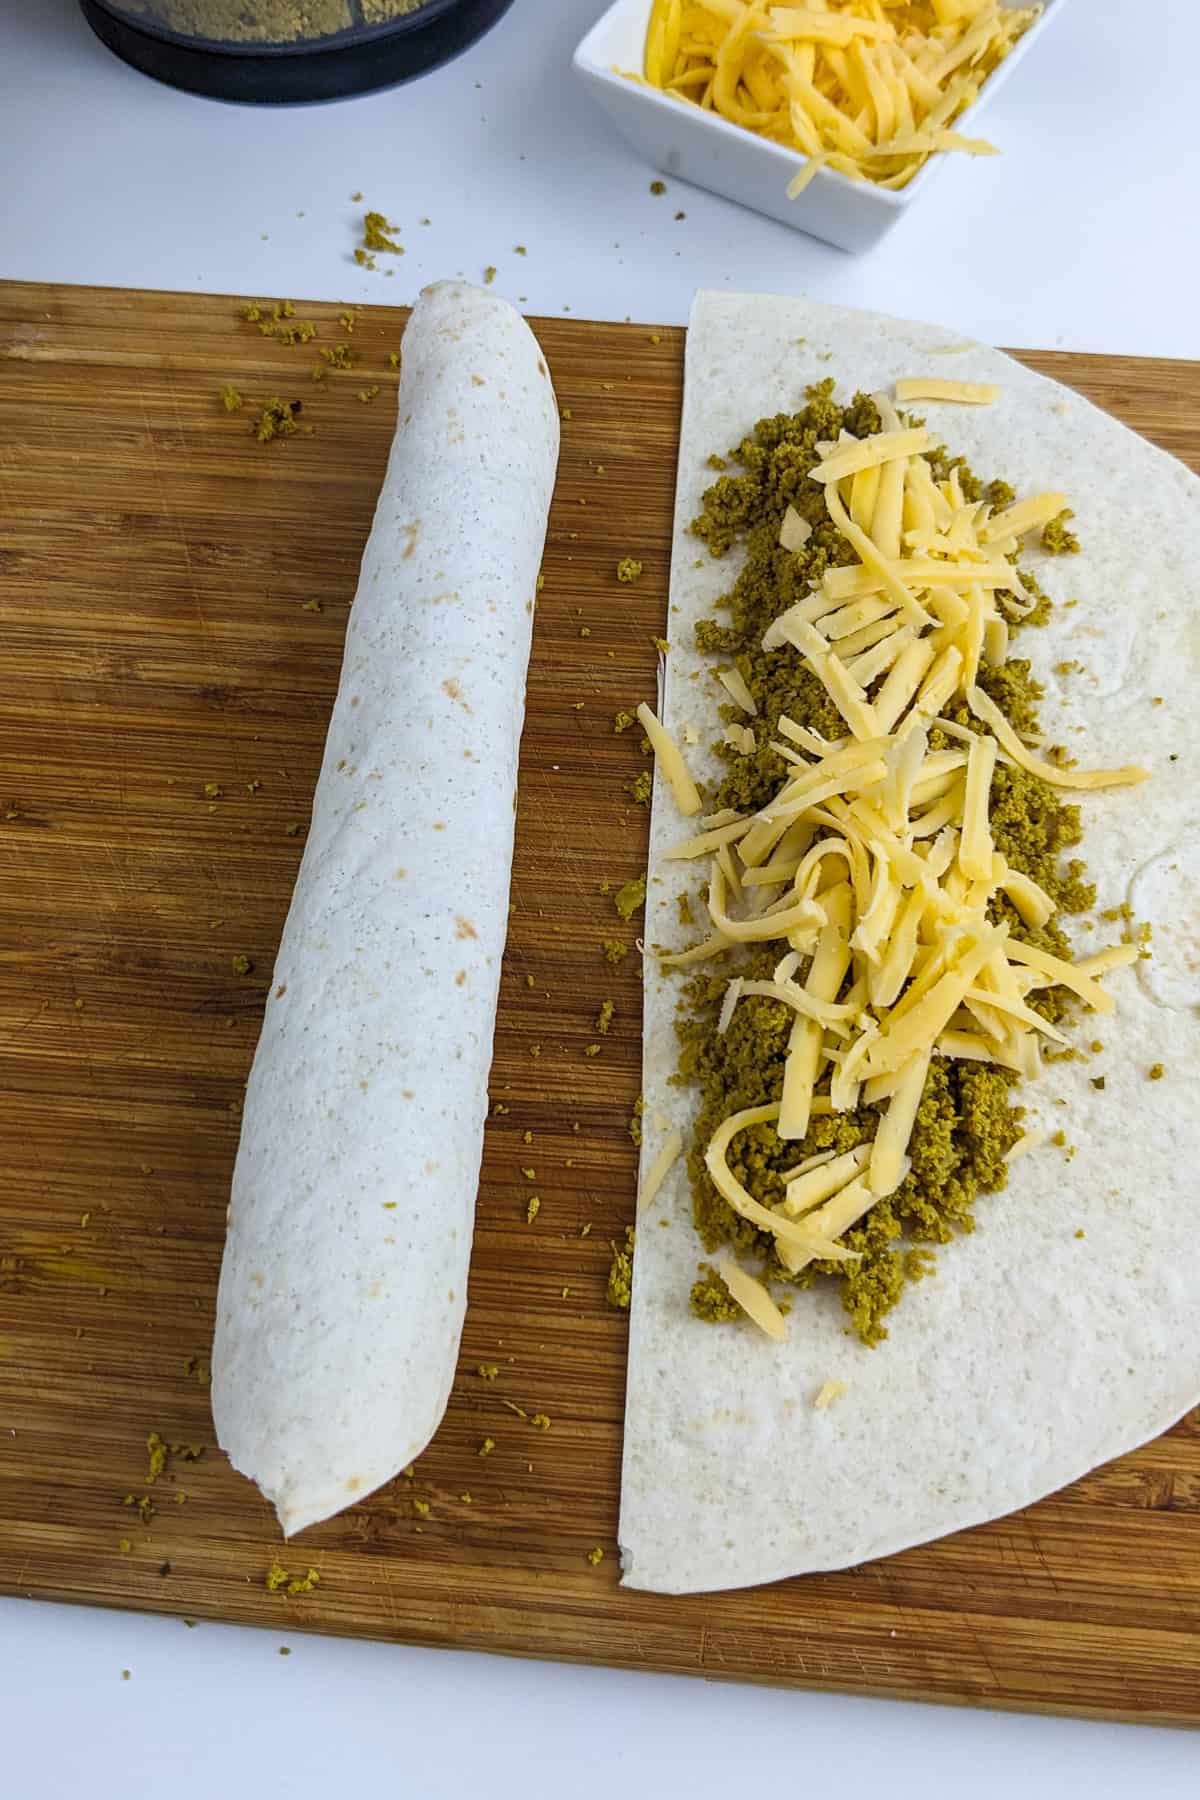 Rolled tortilla to form a beef crispitos on a wooden cutting board.